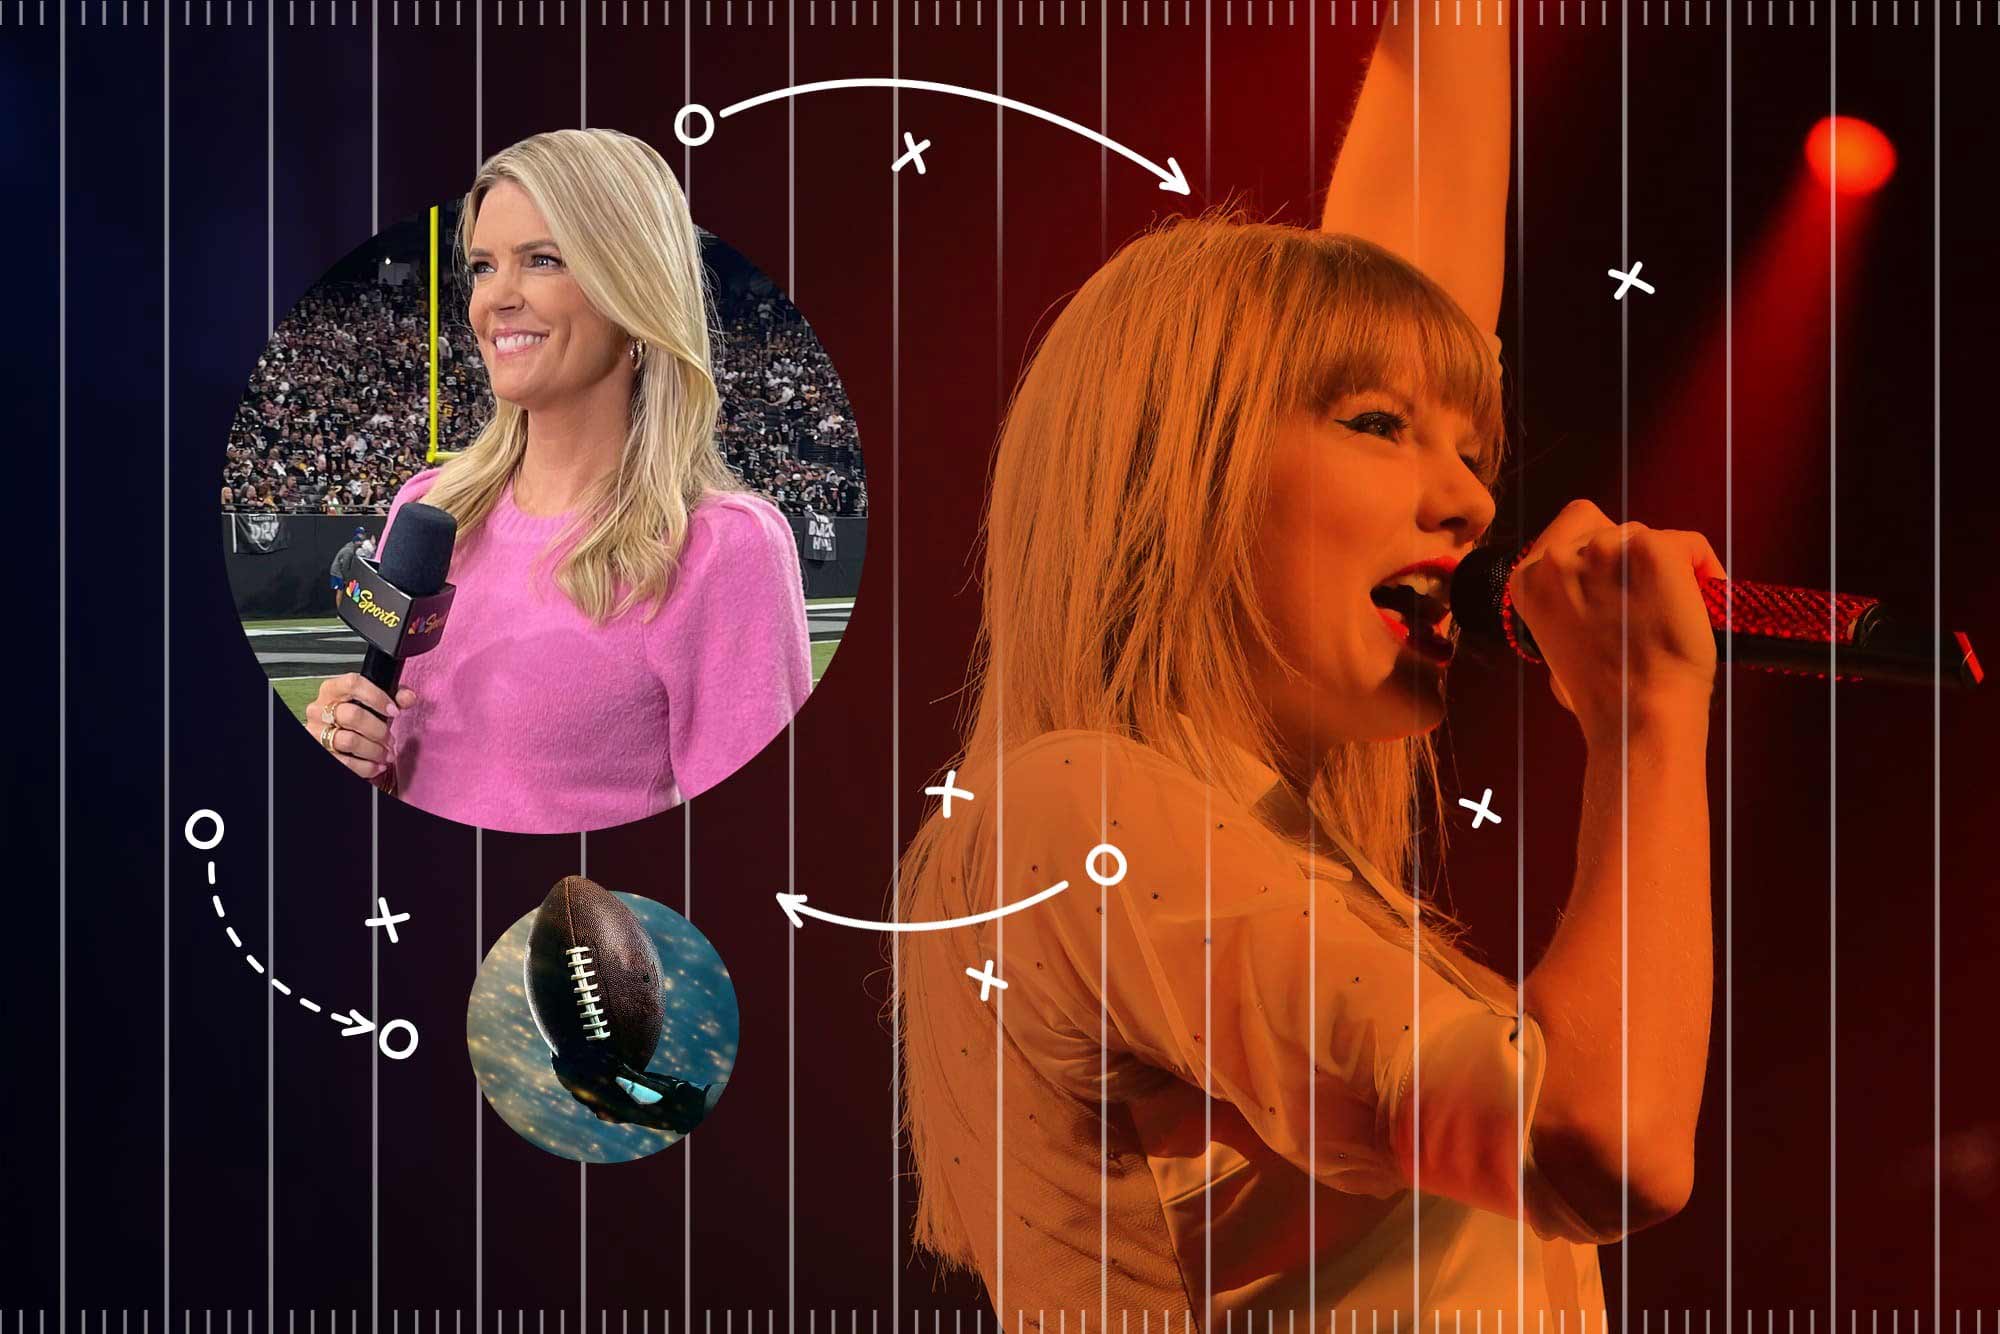 A collage of a football field, Taylor Swift, and UVA alumna